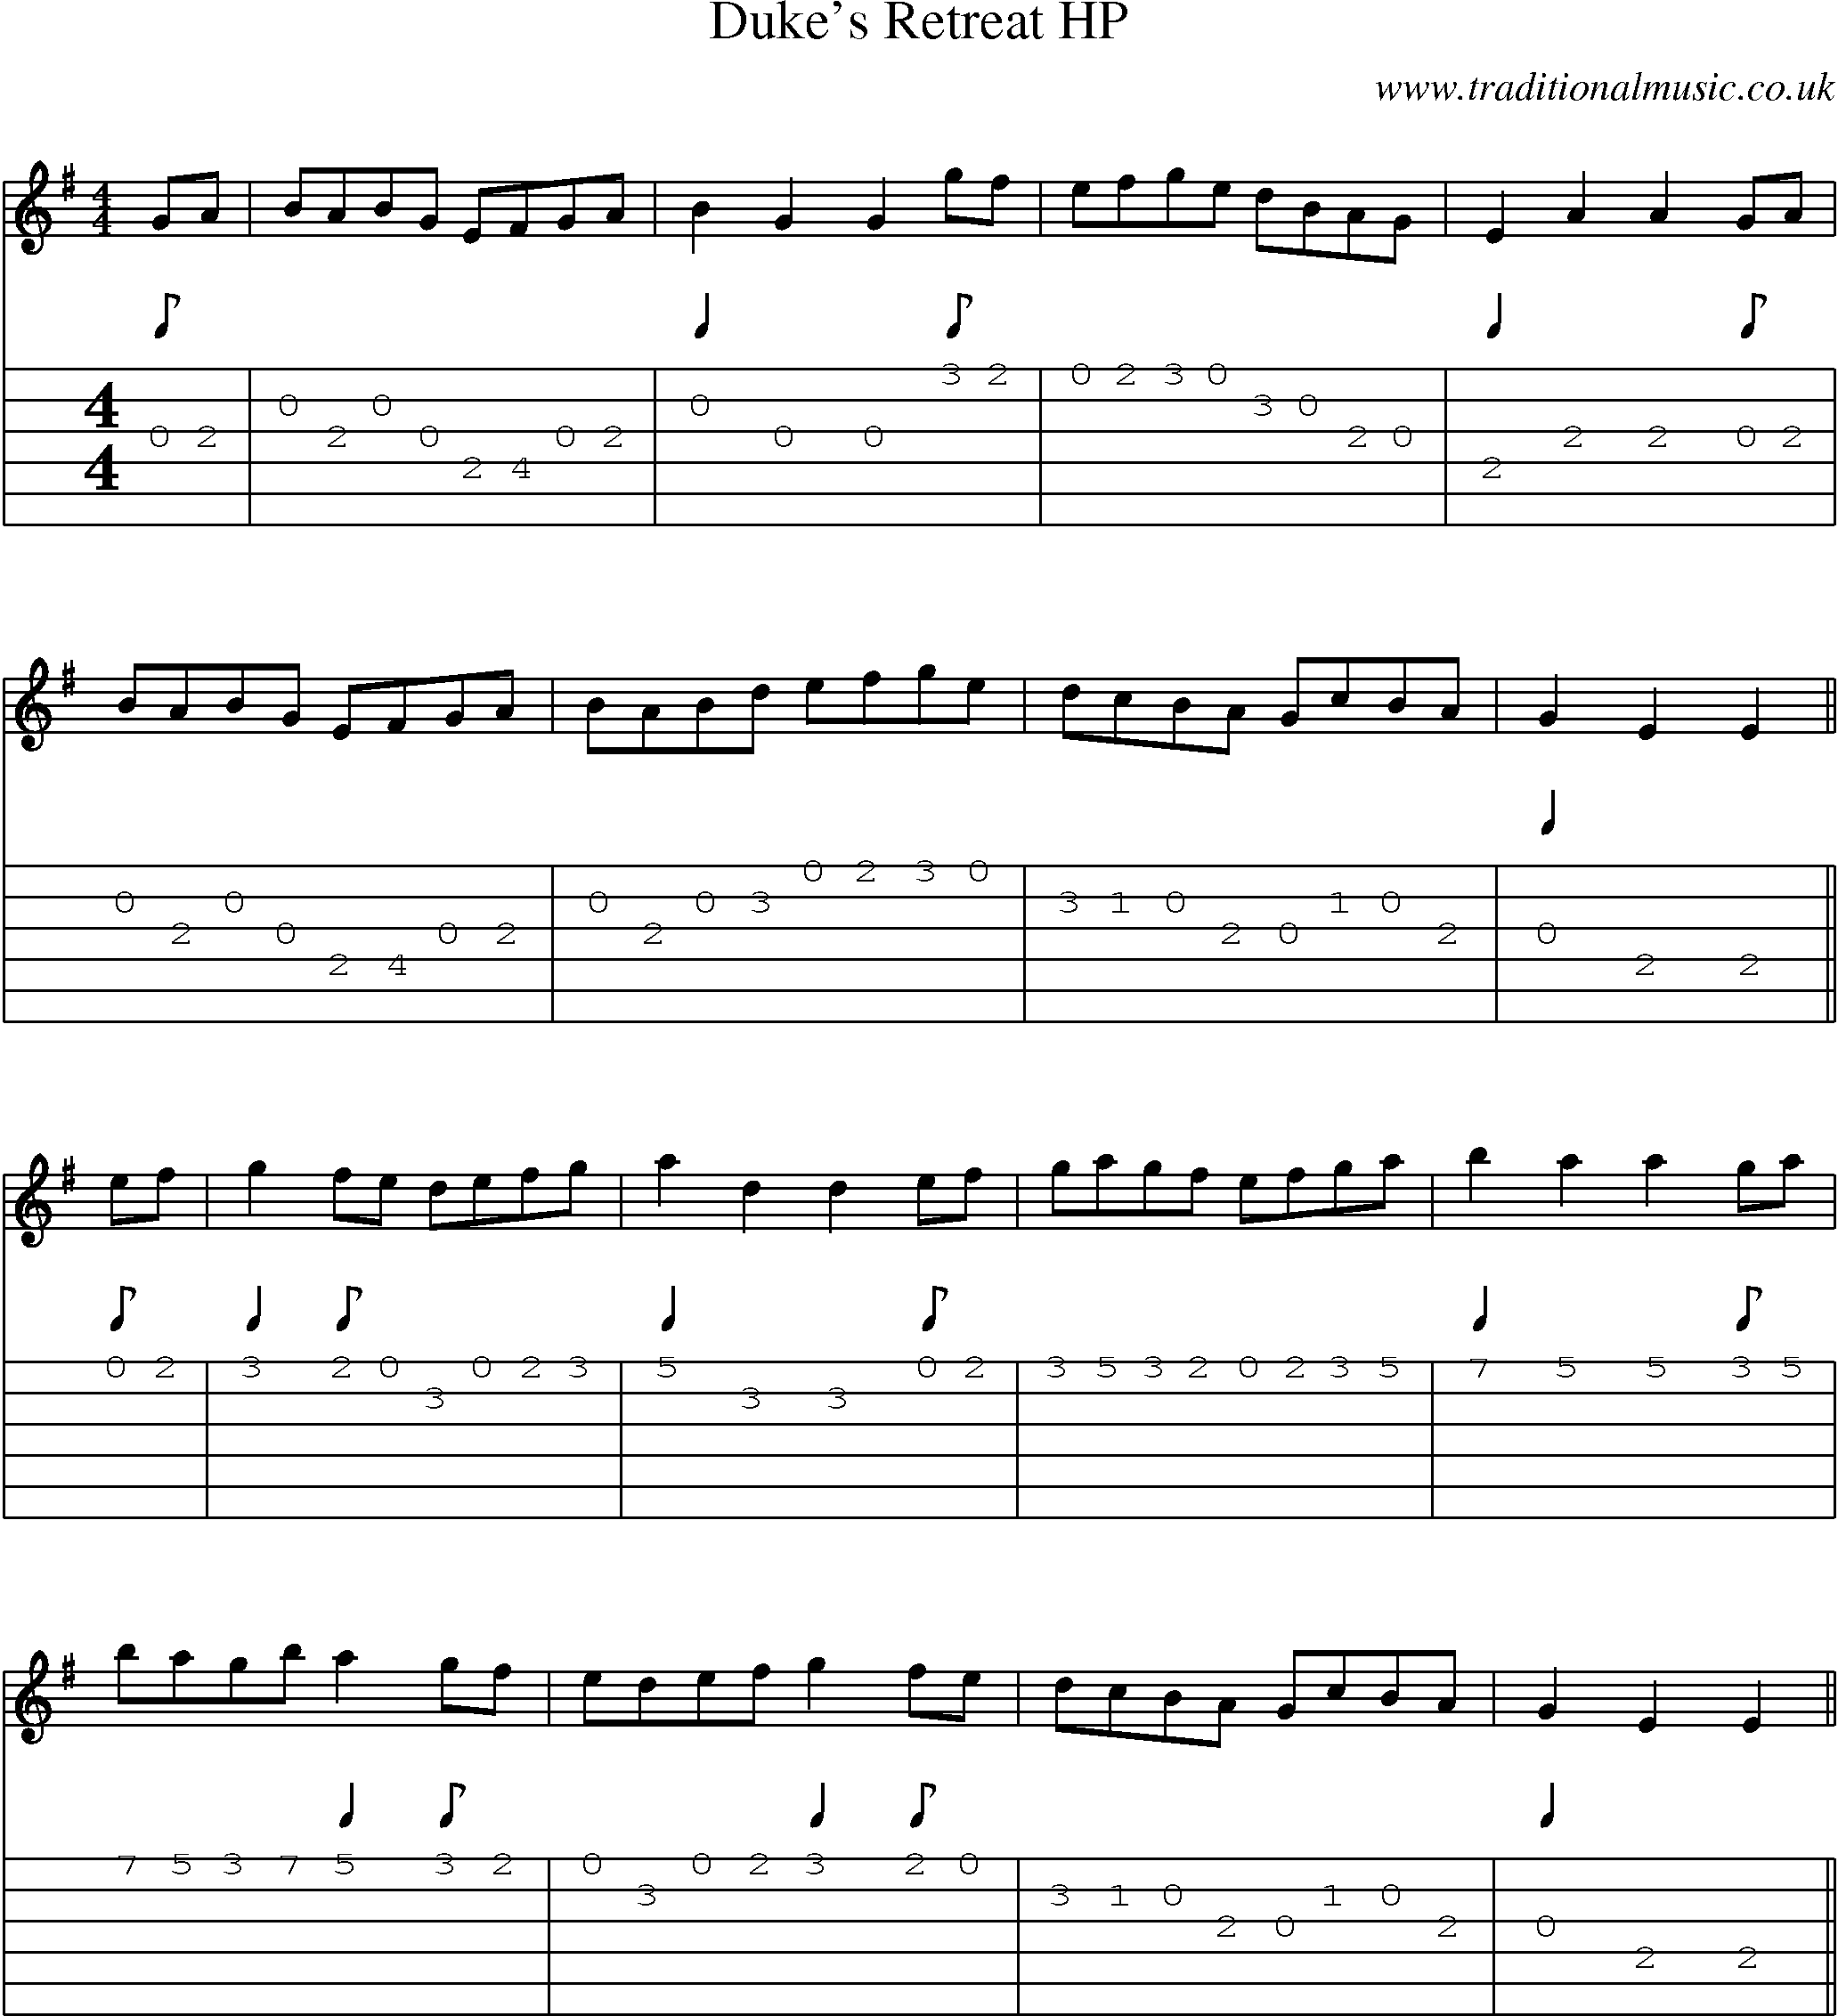 Music Score and Guitar Tabs for Dukes Retreat